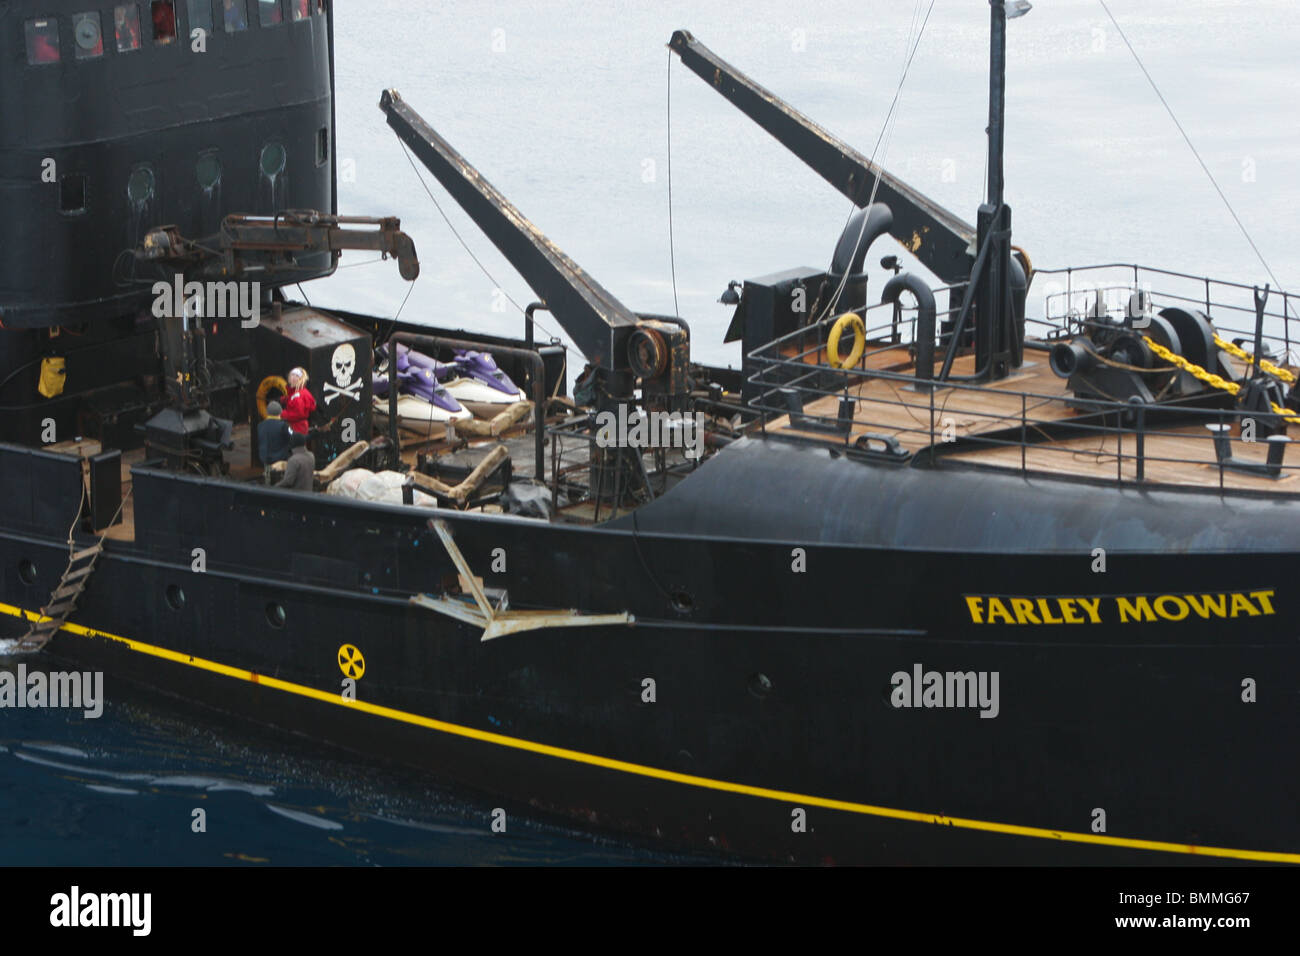 Sea Shepherd Conservation Society ship, the 'Farley Mowat', in Southern Ocean in 2006 hunting the Japanese whaling fleet. Stock Photo